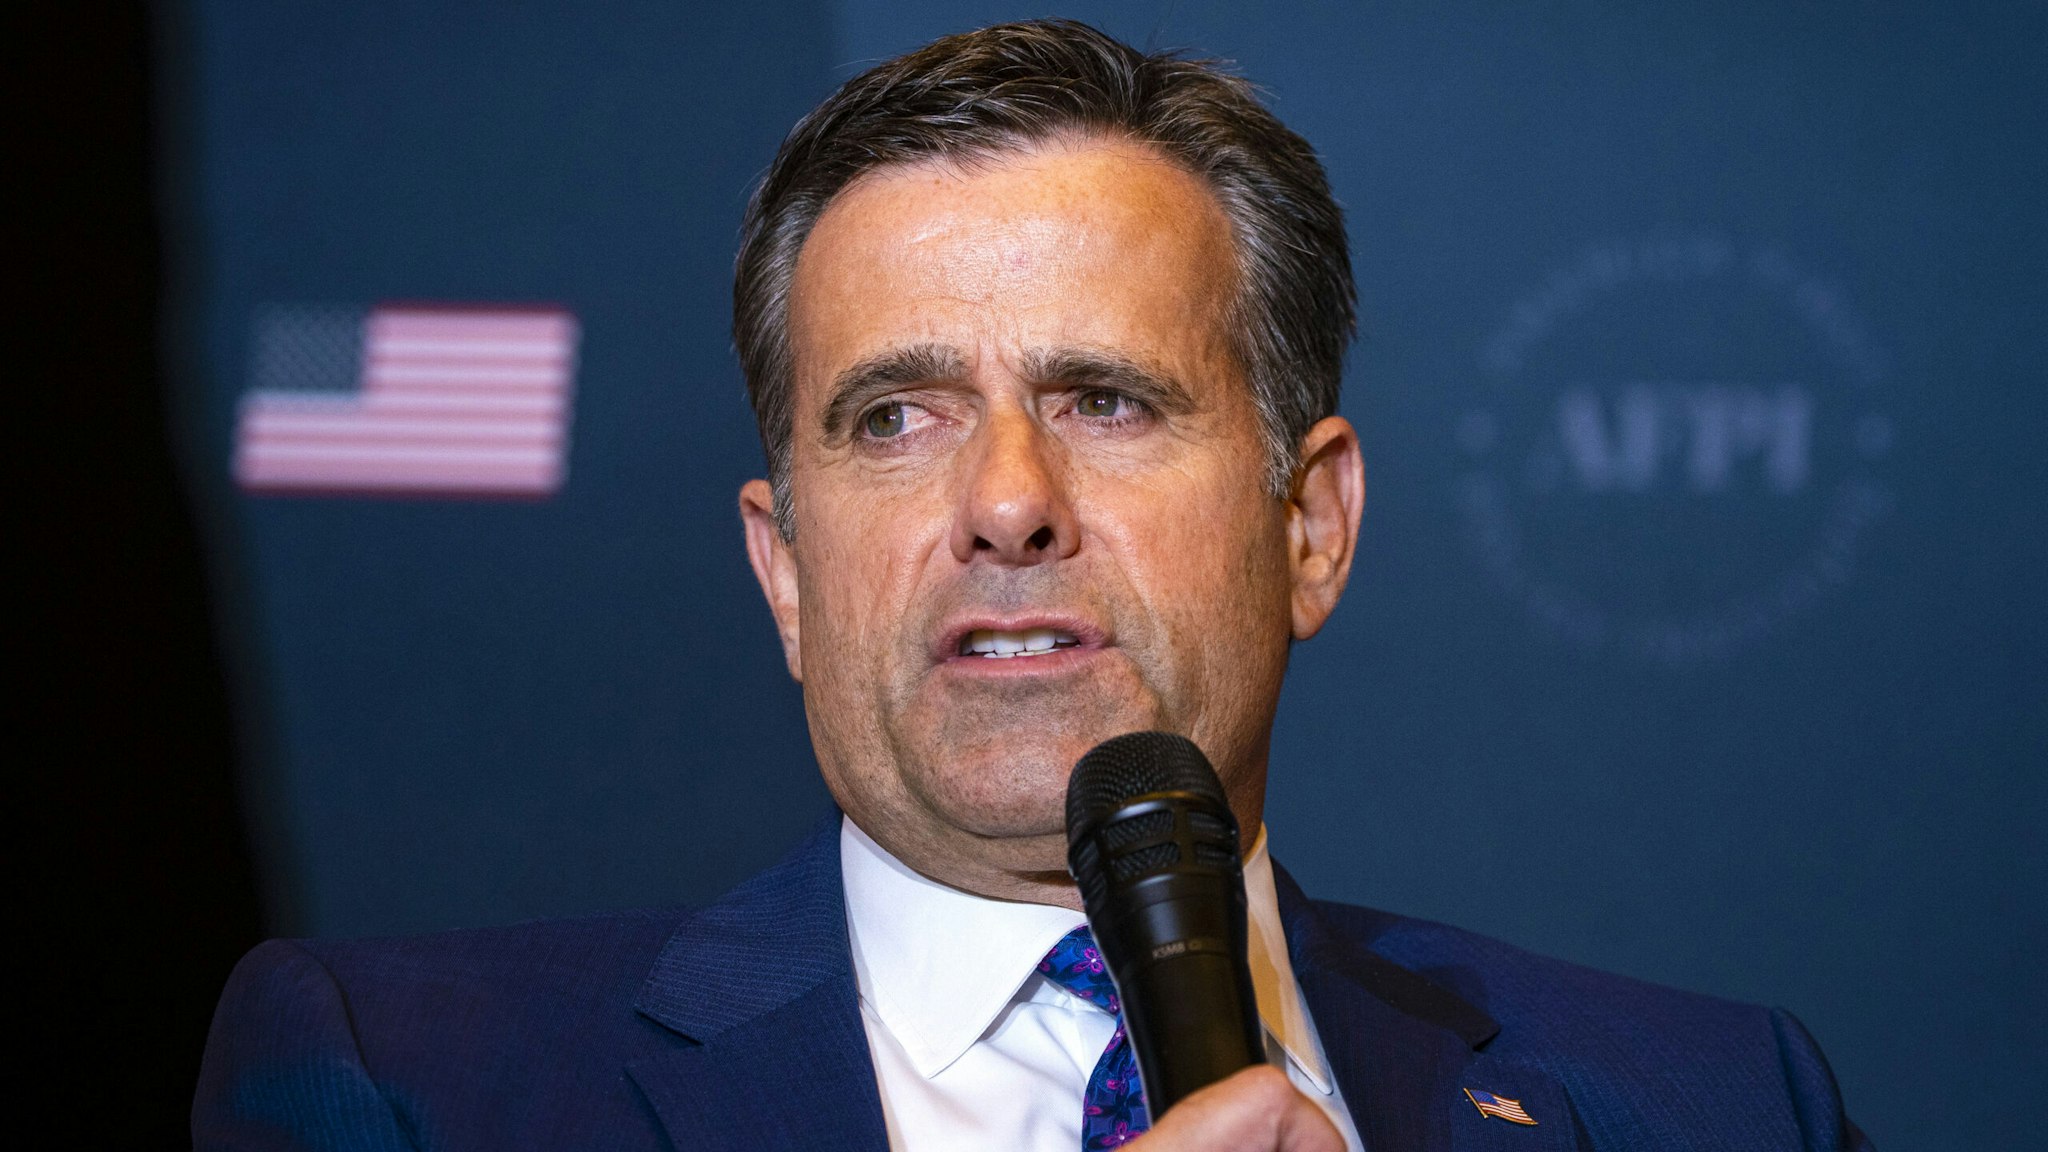 John Ratcliffe, former director of National Intelligence, speaks during the America First Policy Institute's America First Agenda summit in Washington, D.C., US, on Monday, July 25, 2022. The non-profit think tank was formed last year by former cabinet members and top officials in the Trump administration to create platforms based on his policies.